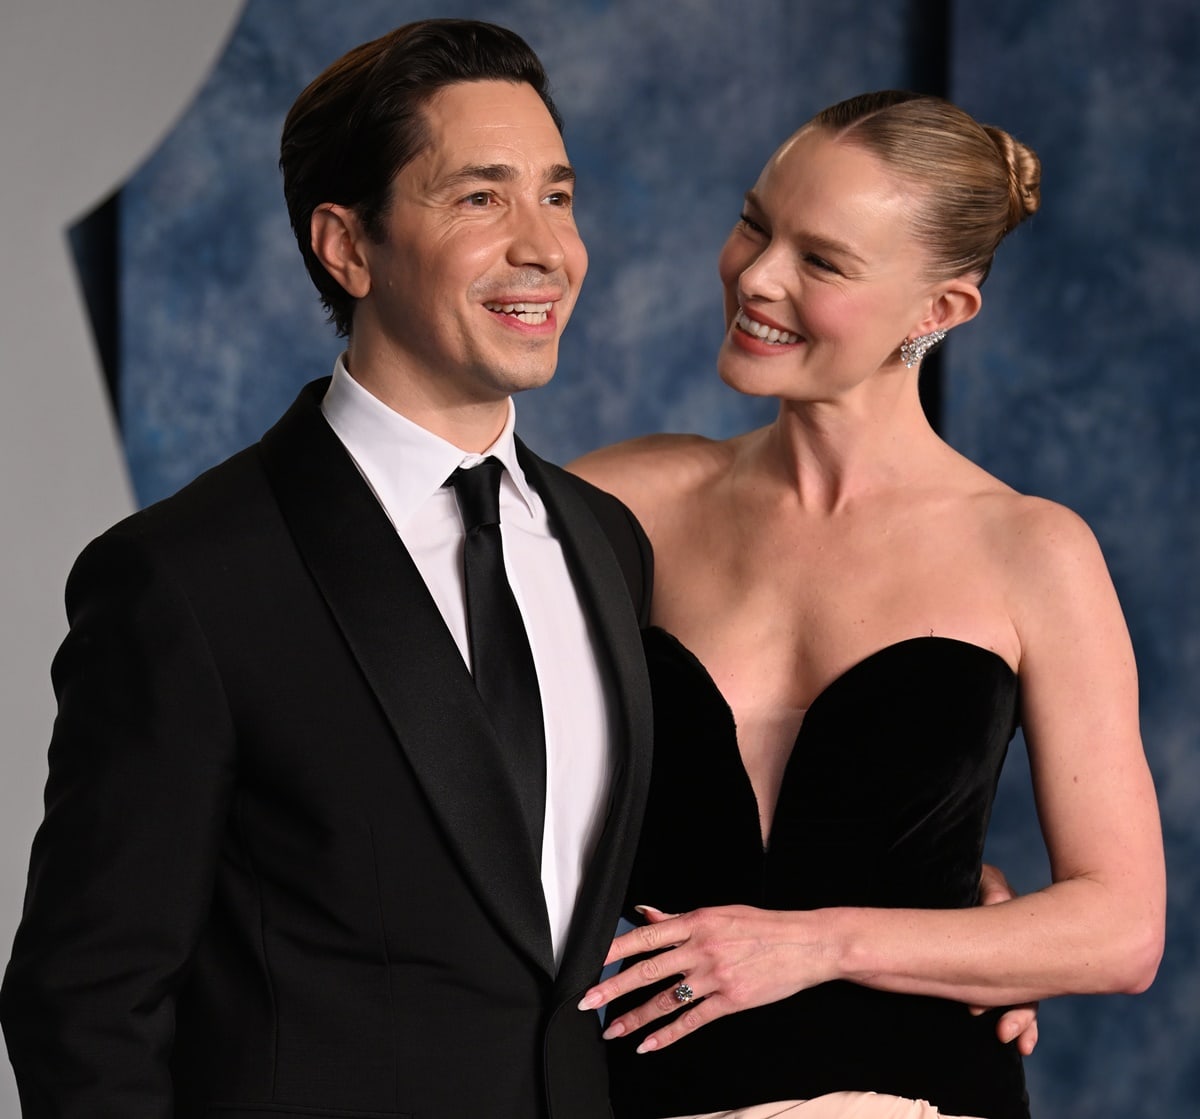 Justin Long and Kate Bosworth revealed that they each knew they had found "the one" shortly after building a friendship while working alongside each other in the 2022 American comedy horror film House of Darkness